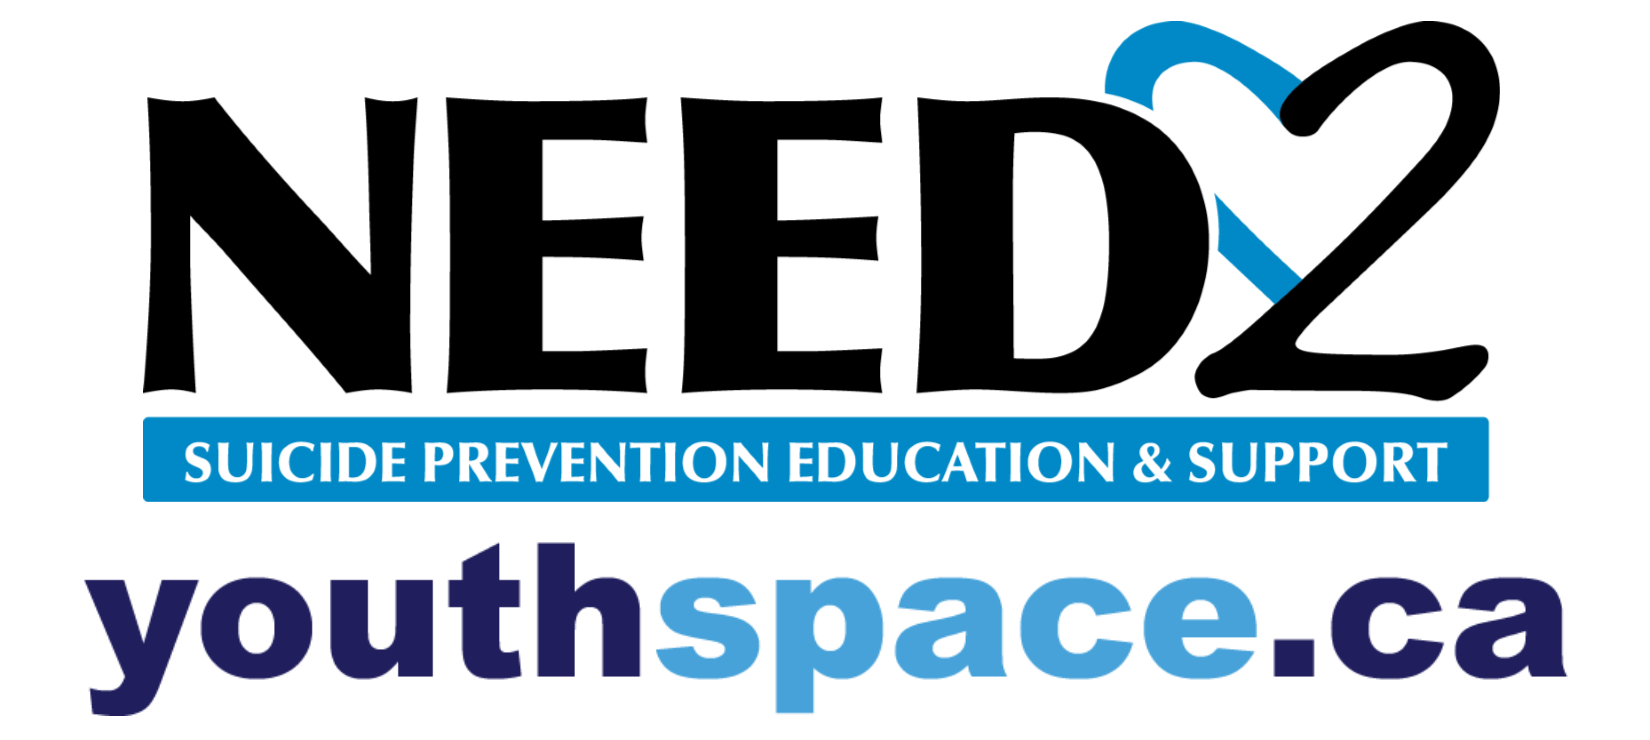 NEED2 Suicide Prevention Education & Support logo